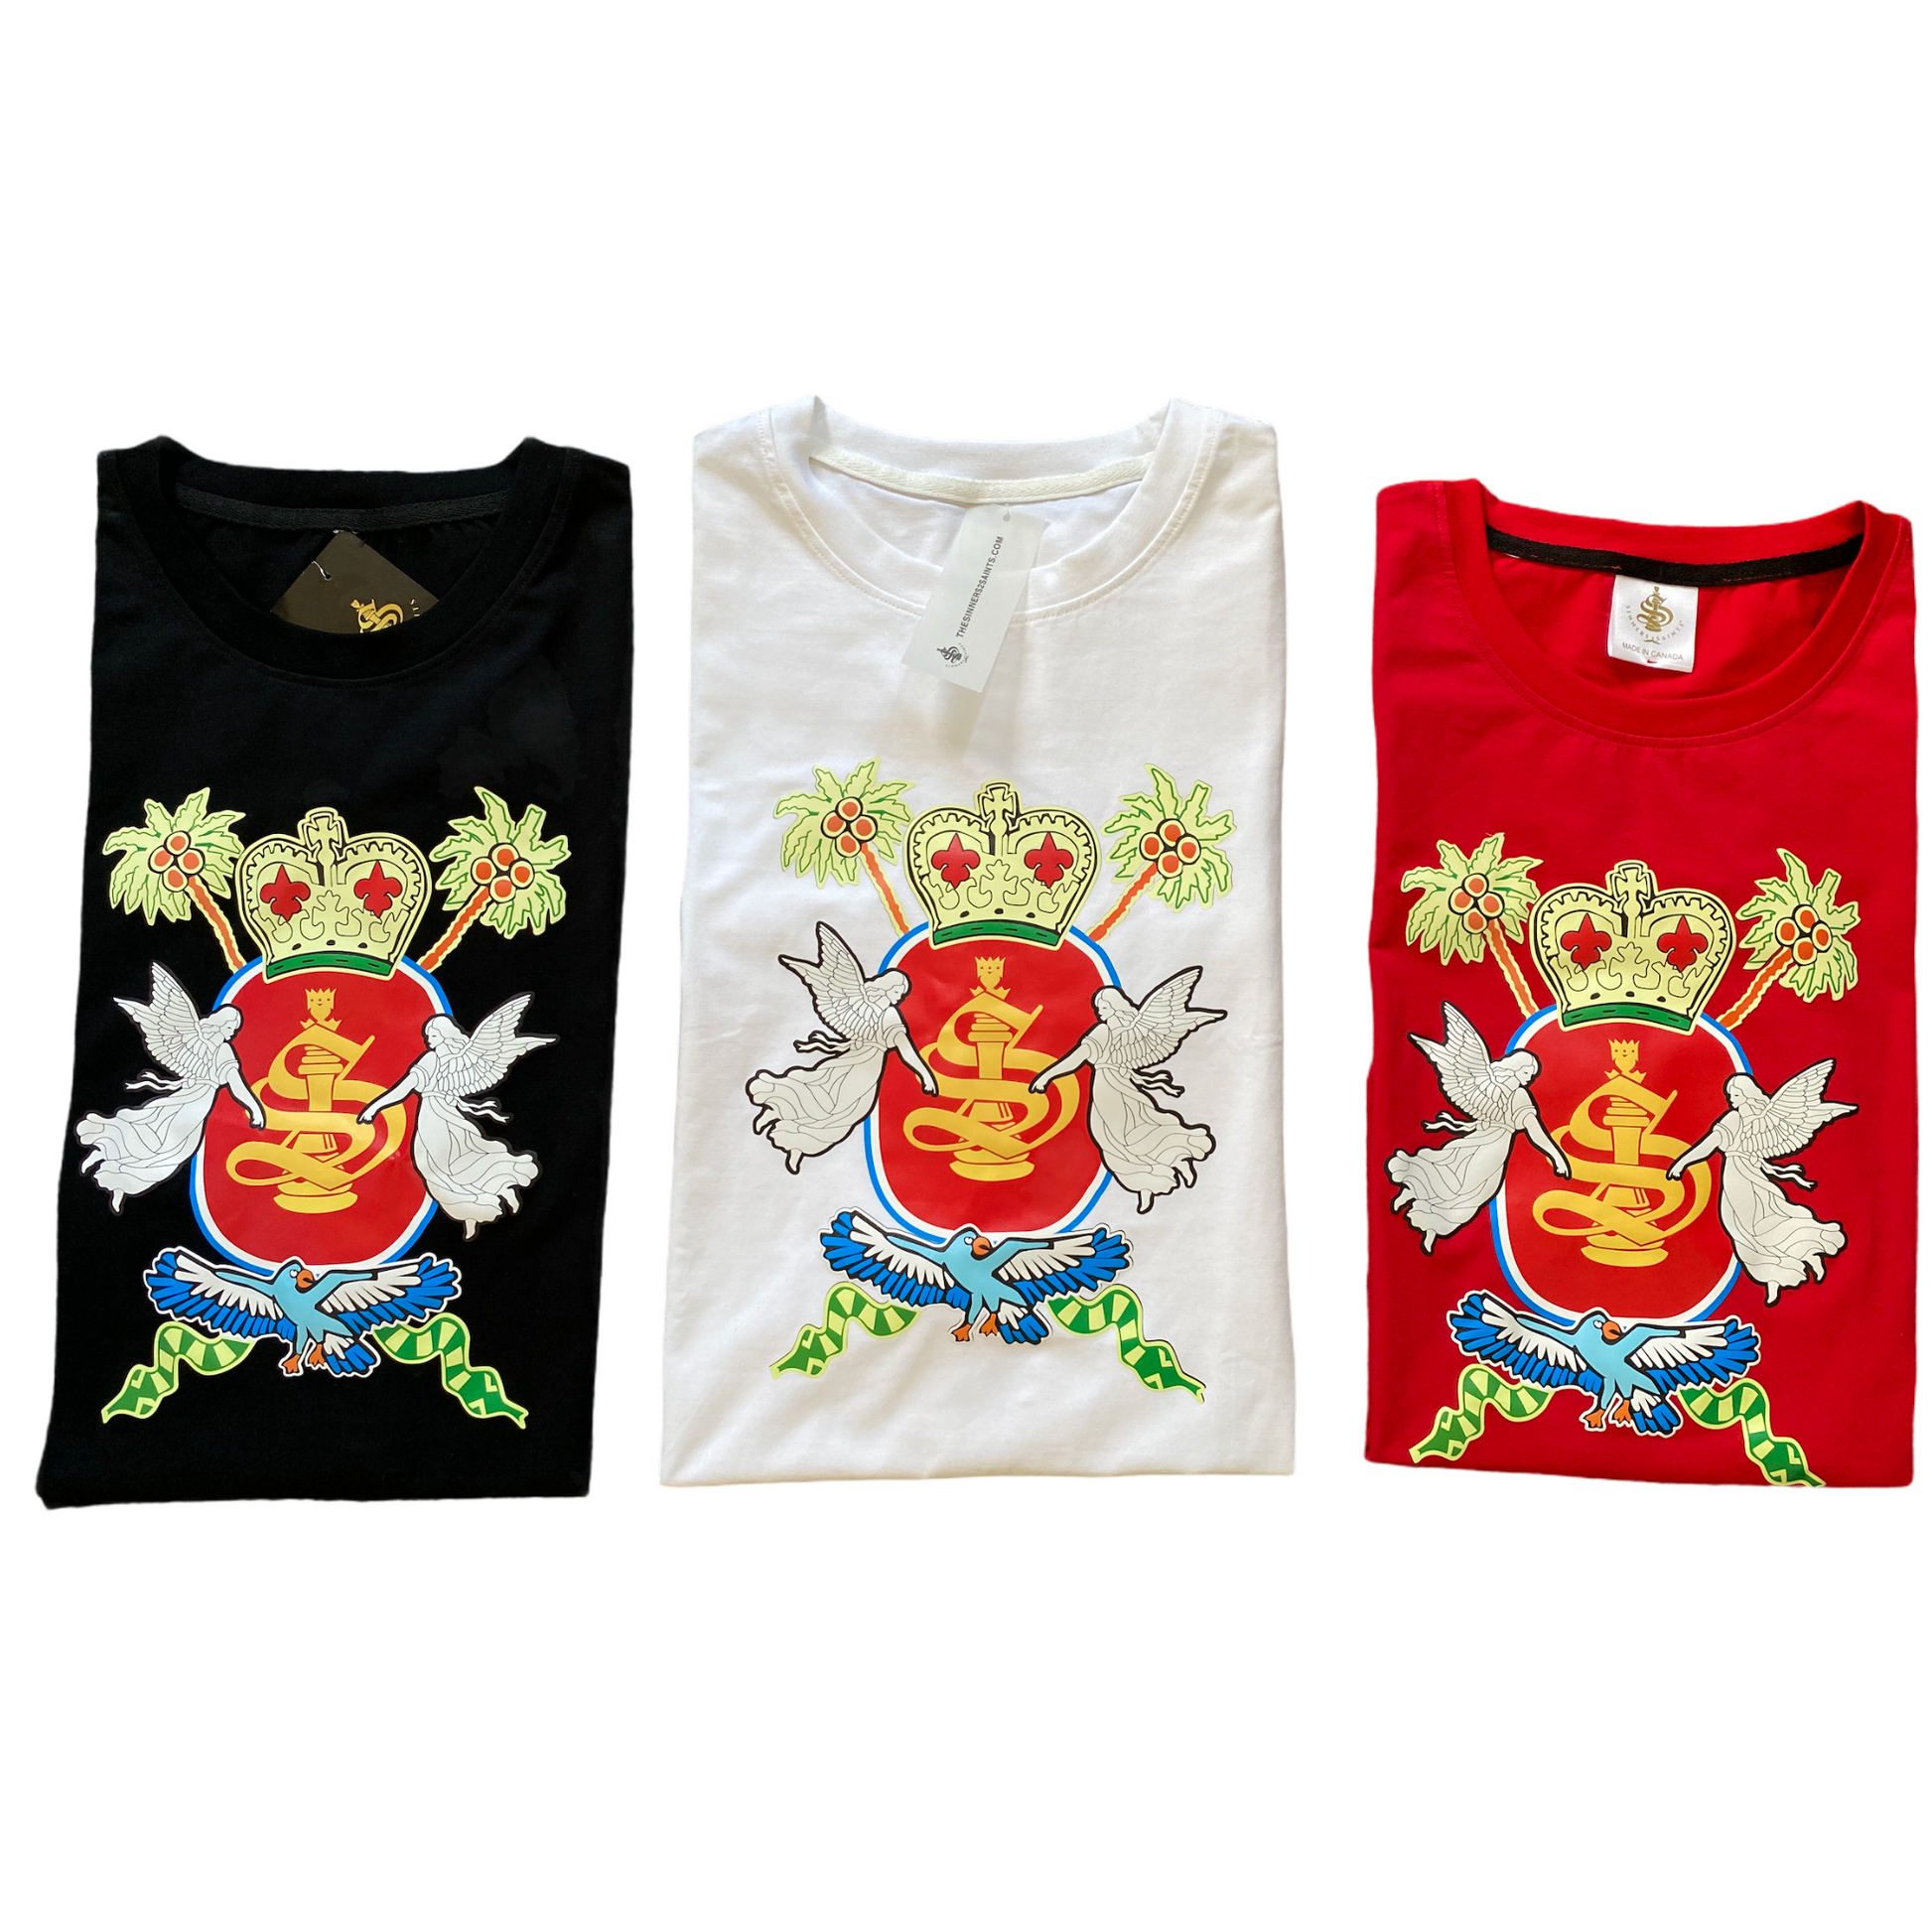 'Coat of Arms' 3D Embossed Design T-shirts - Red, Black, White Special Release!! - TheSinners2Saints